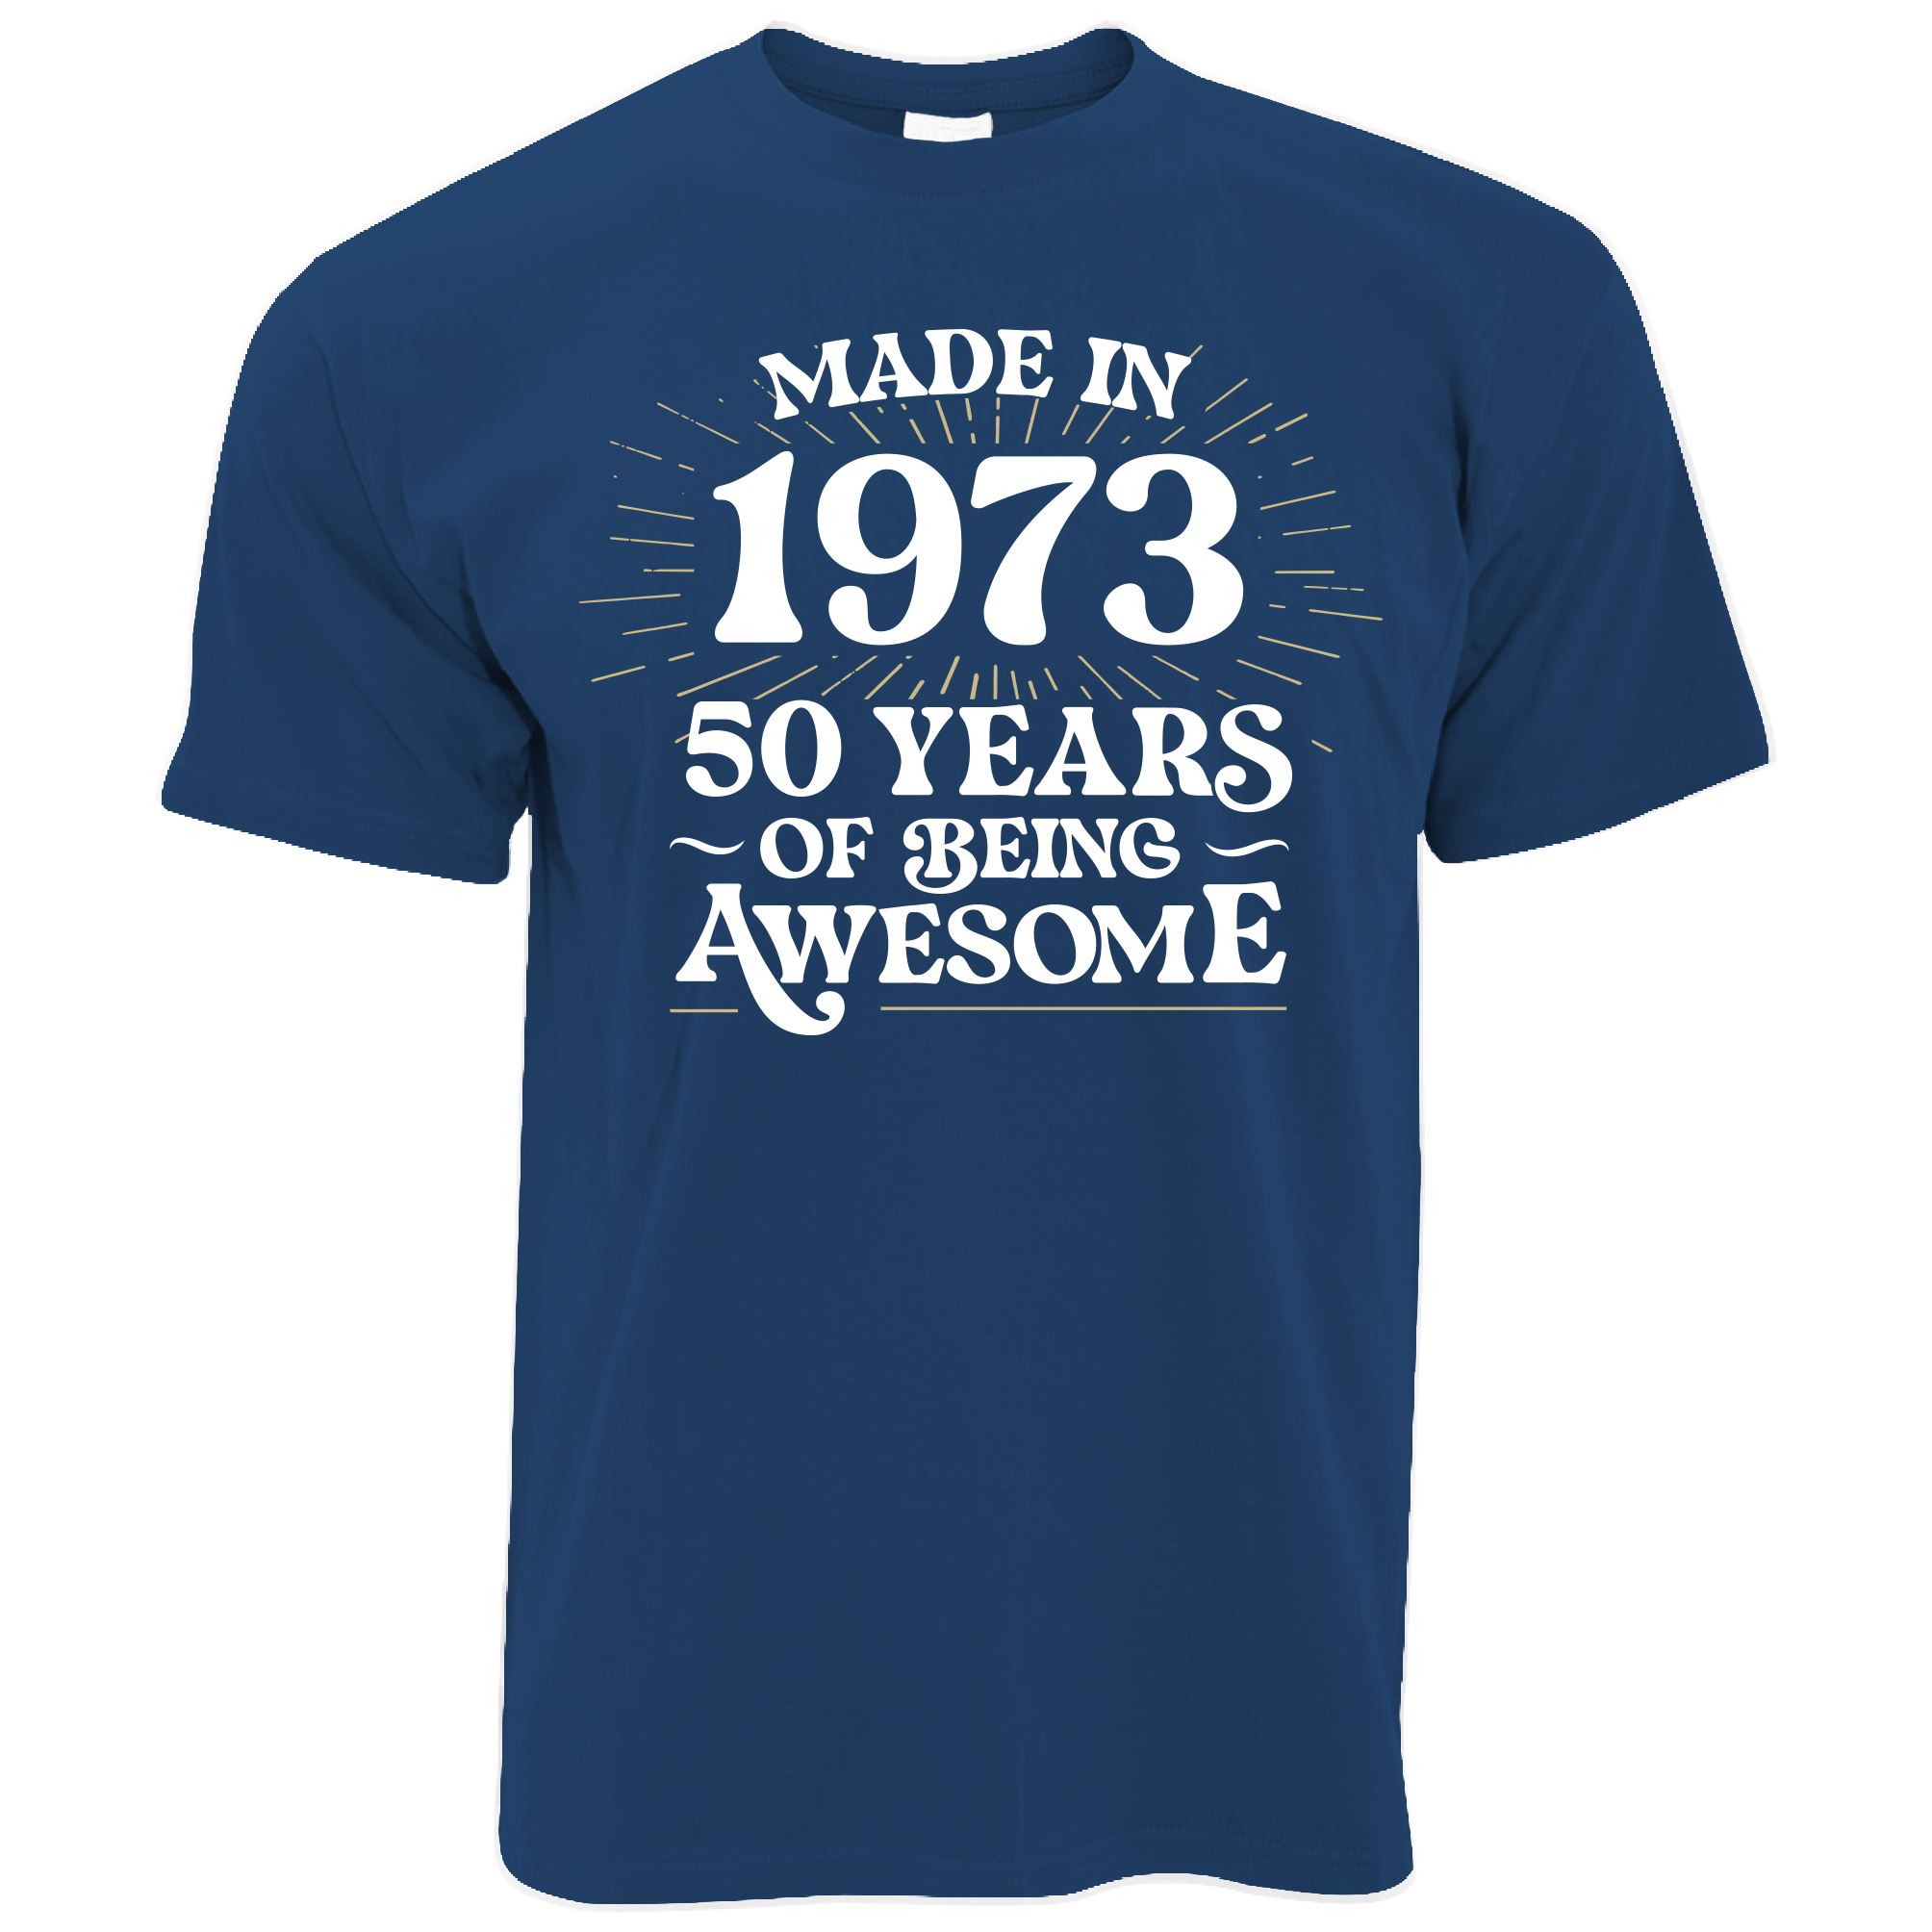 50th Birthday T Shirt Made in 1973 - 50 Awesome Years